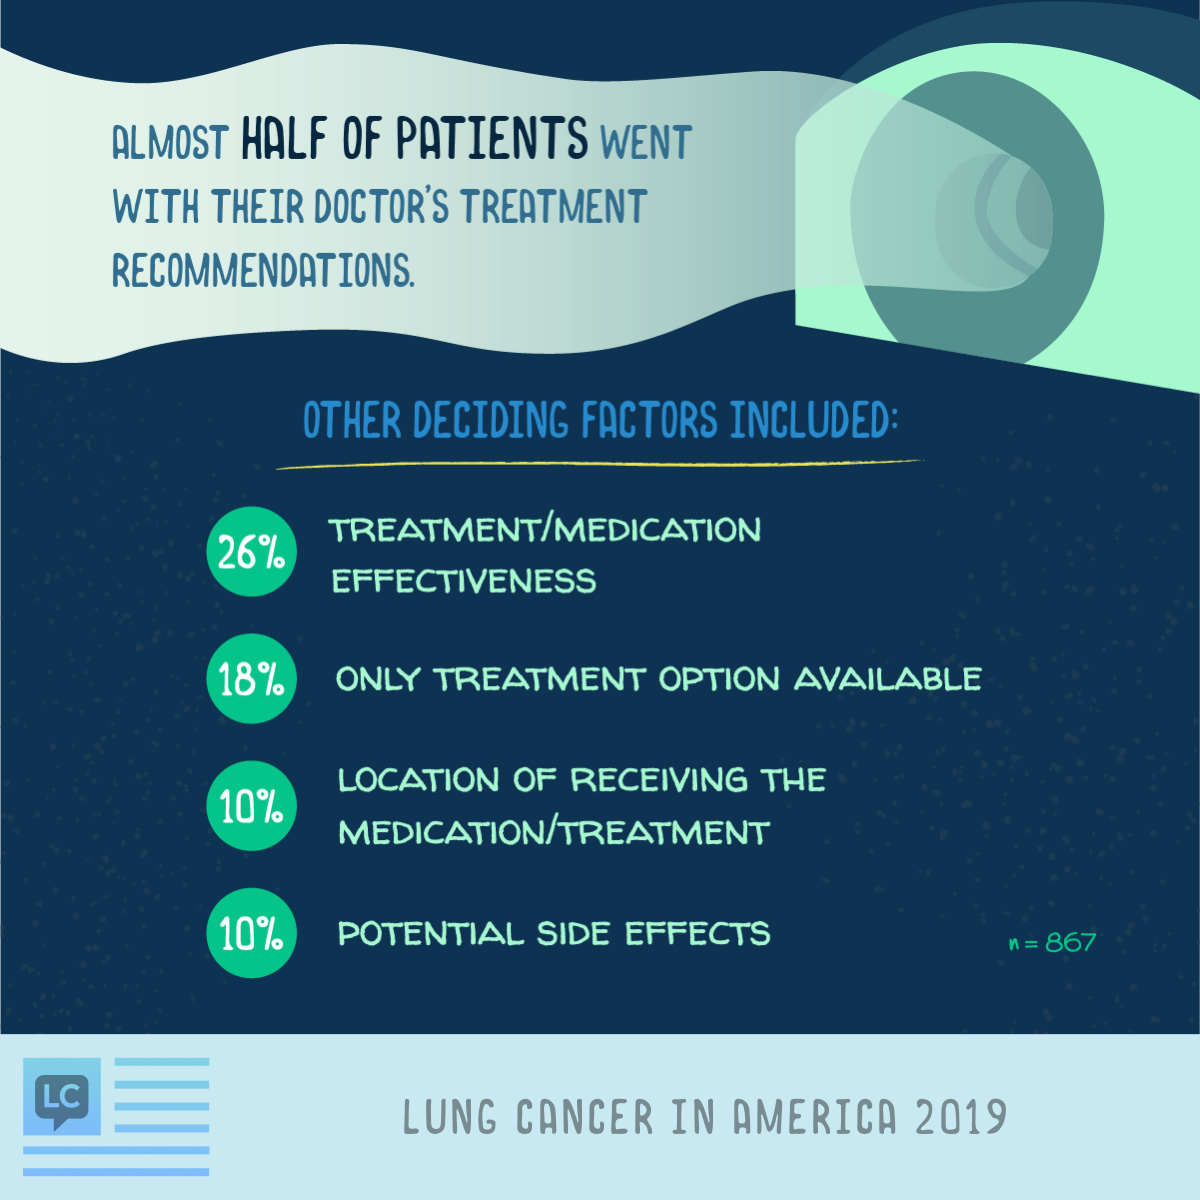 Nearly half of patients went with their doctor’s treatment recommendation while other deciding factors include treatment effectiveness (26%), only treatment available (18%), location of treatment (10%), and potential side effects (10%).